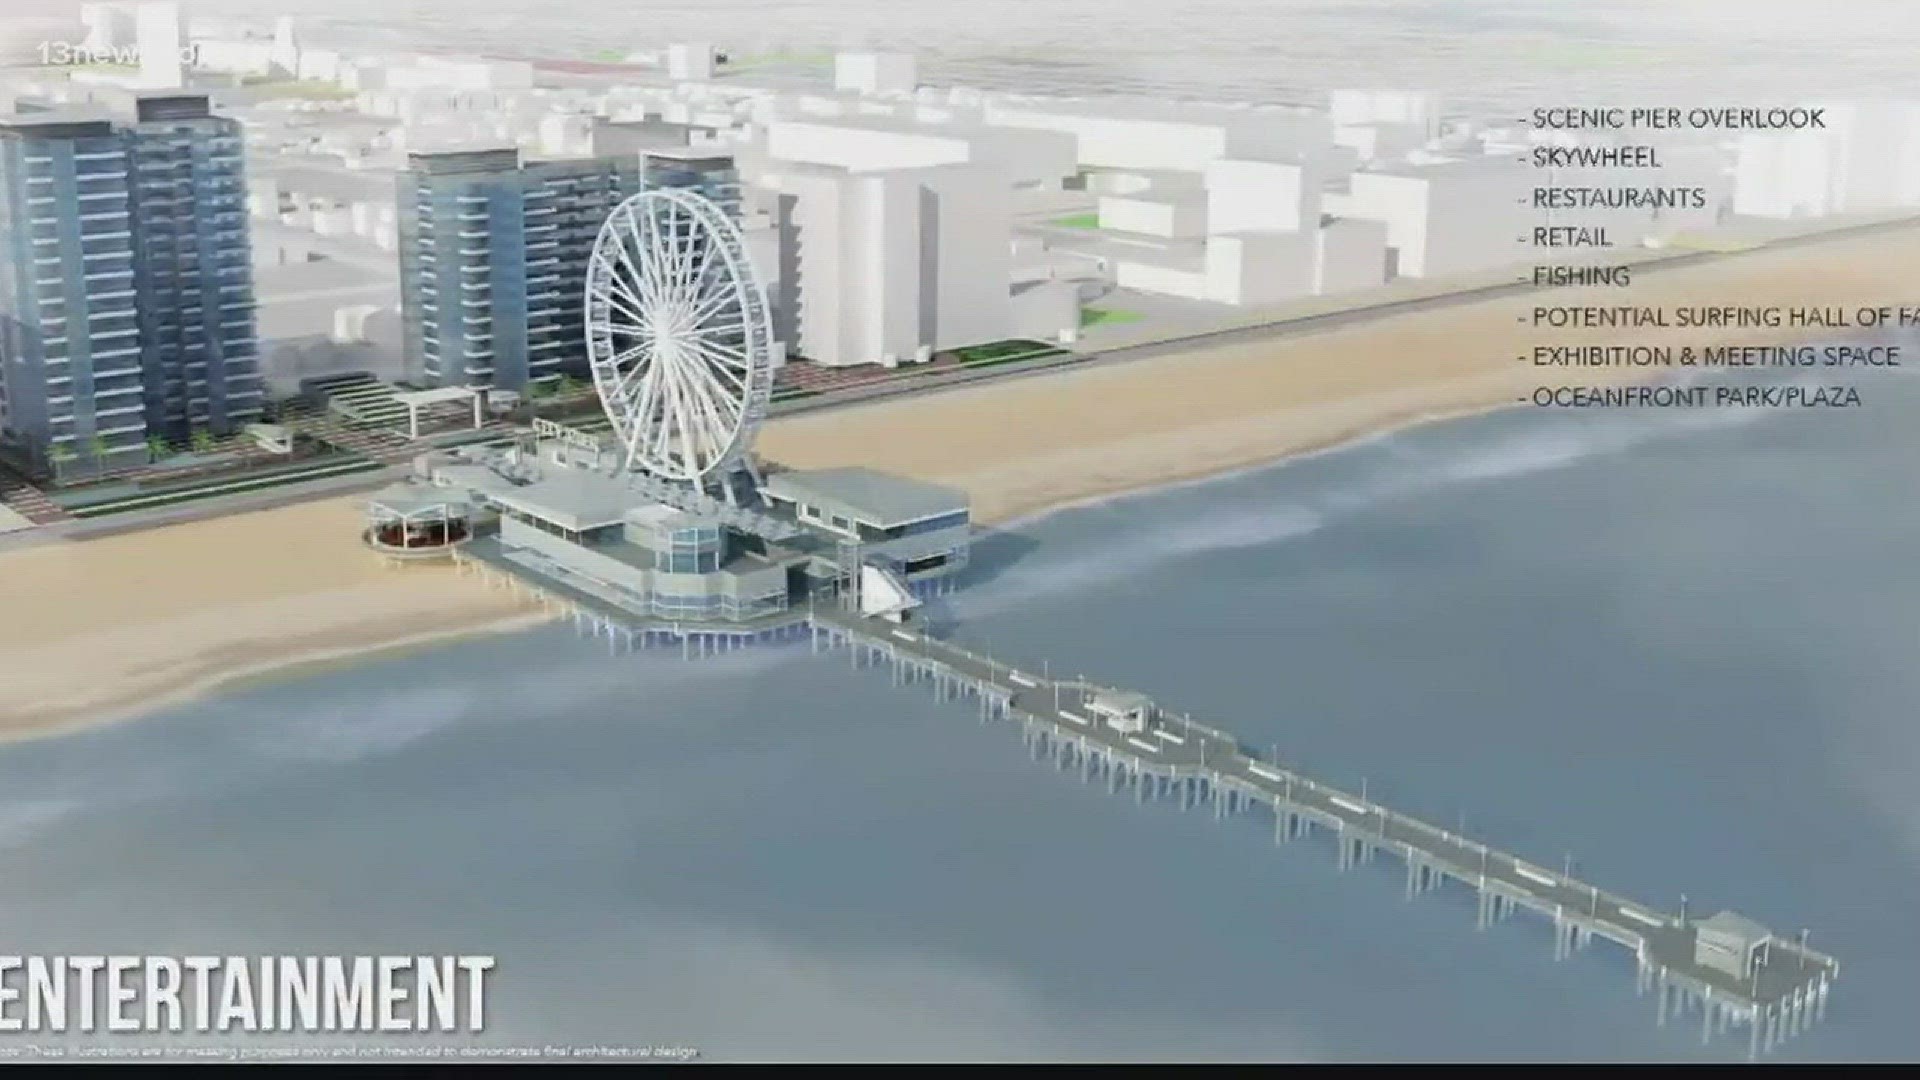 Proposal of a new fishing pier that would replace the existing one on 15th Street.